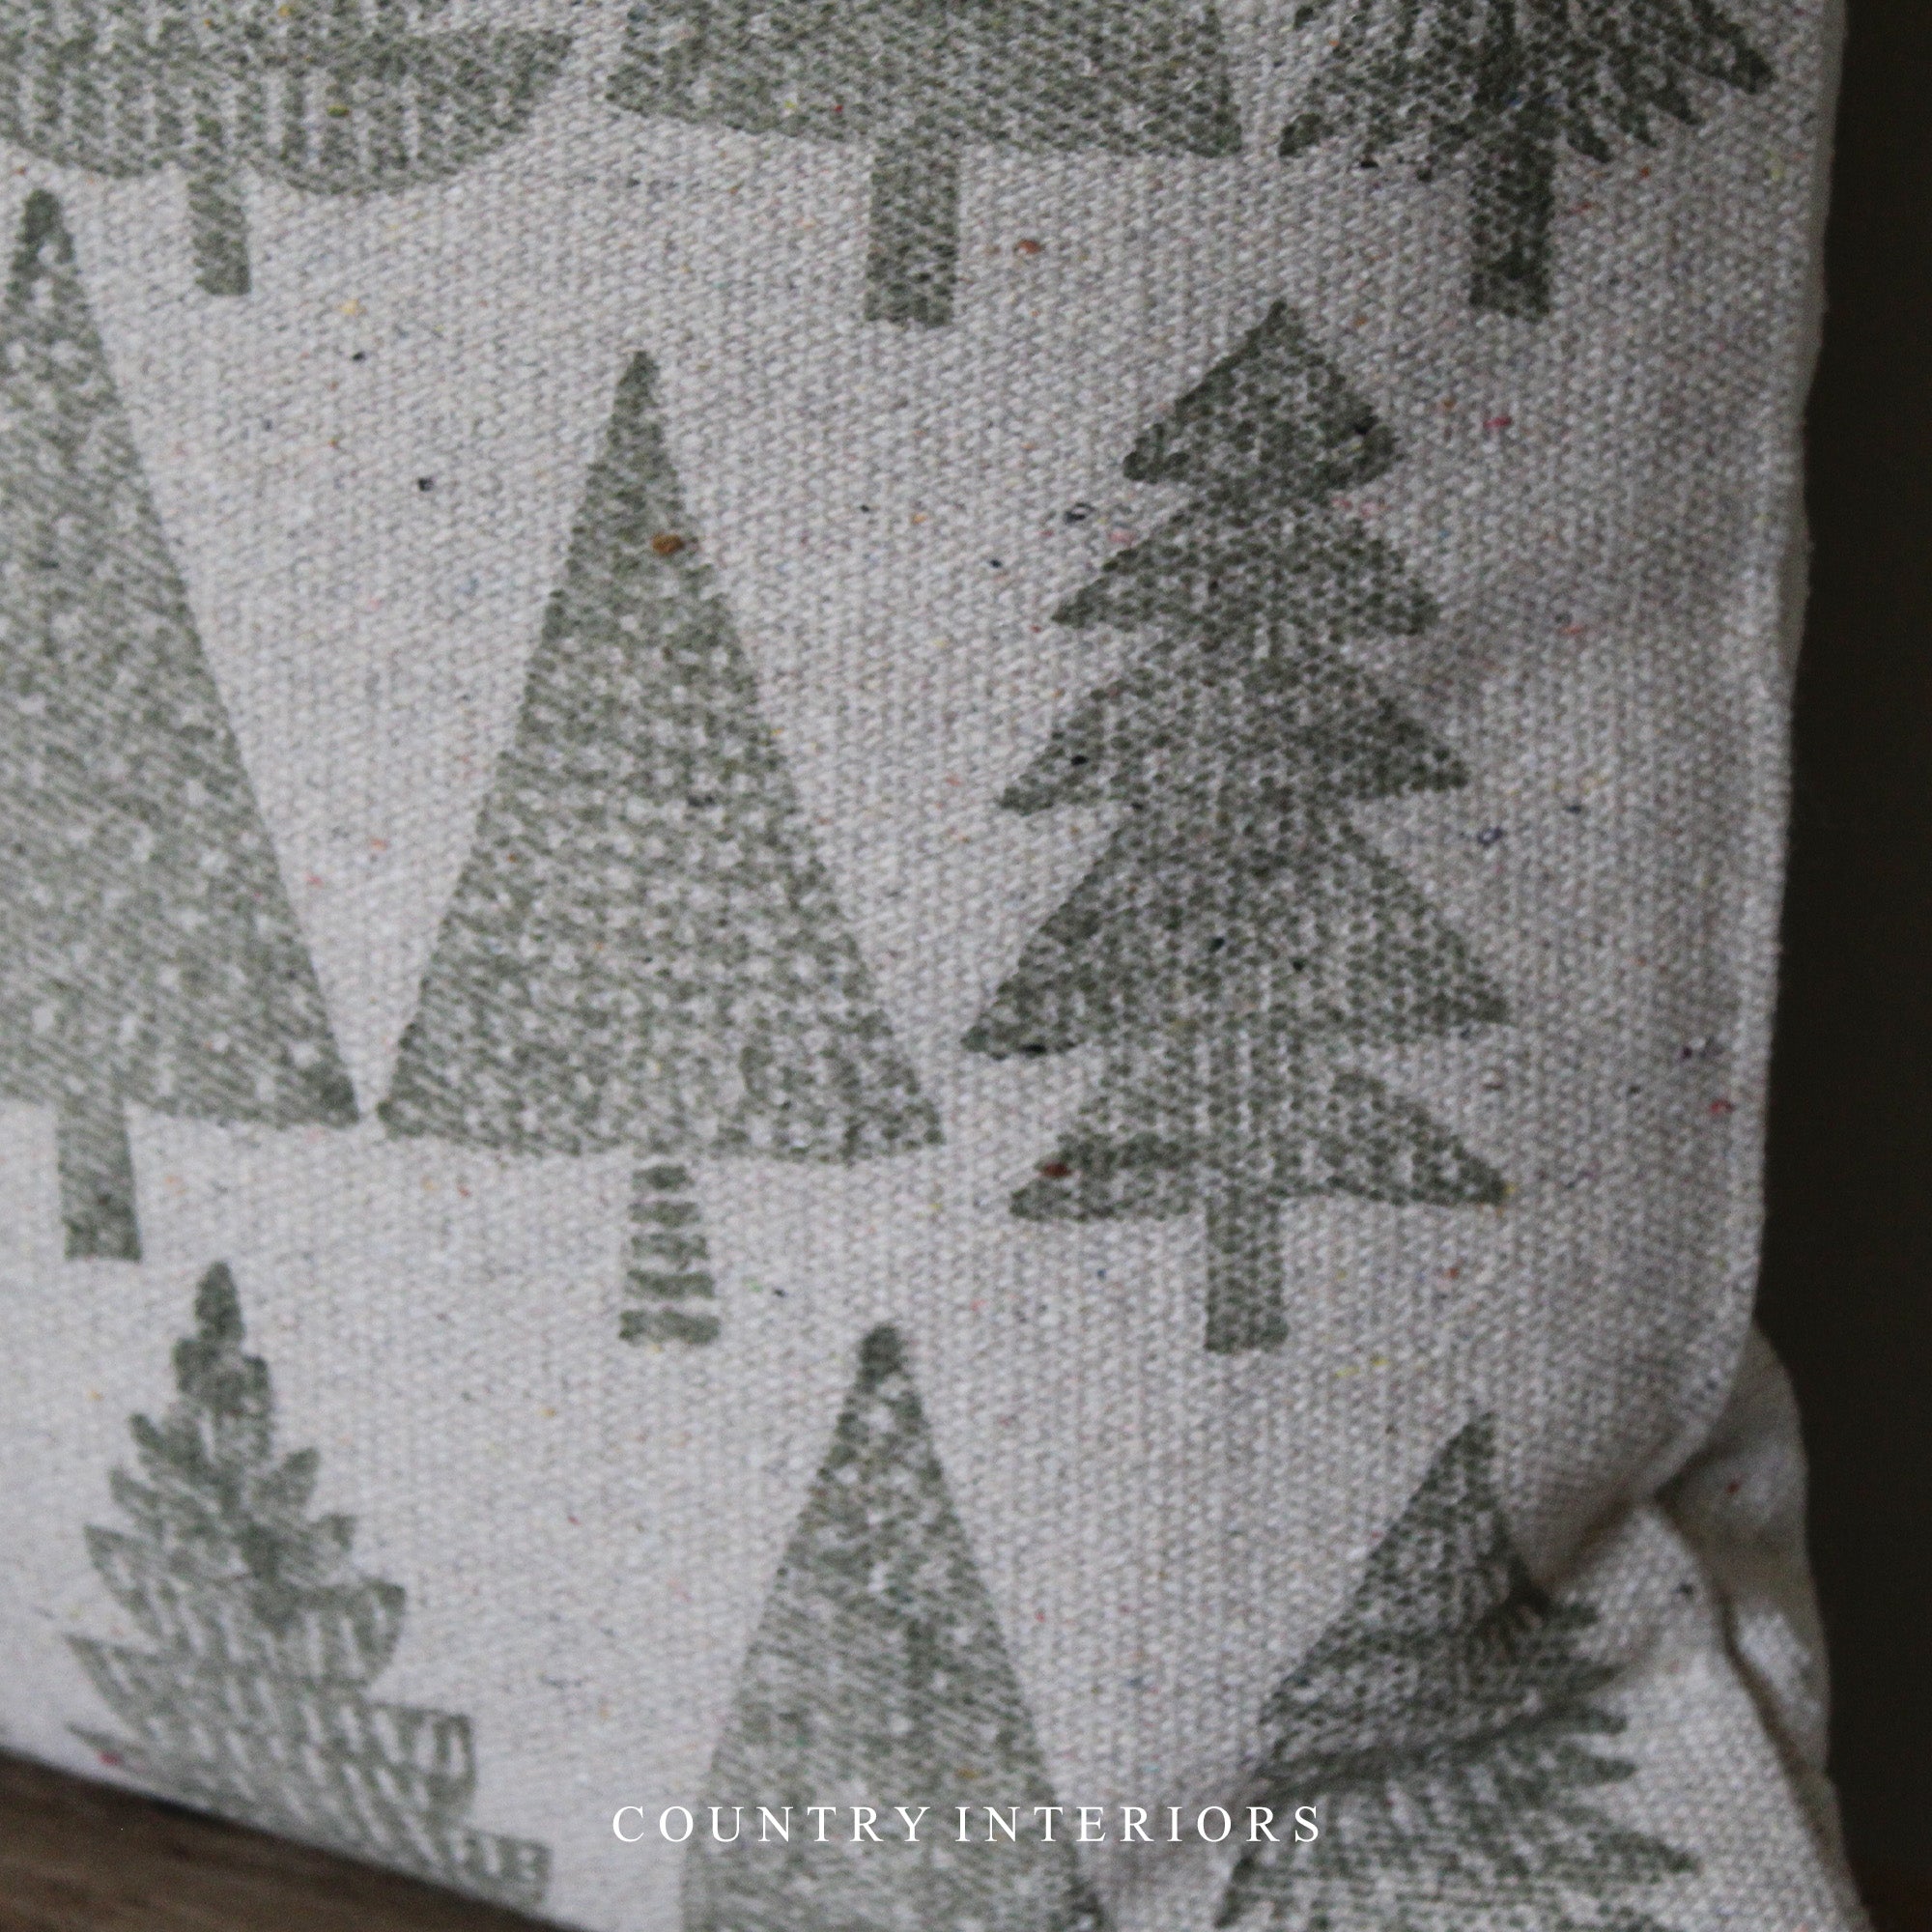 Forest Tree Cushion